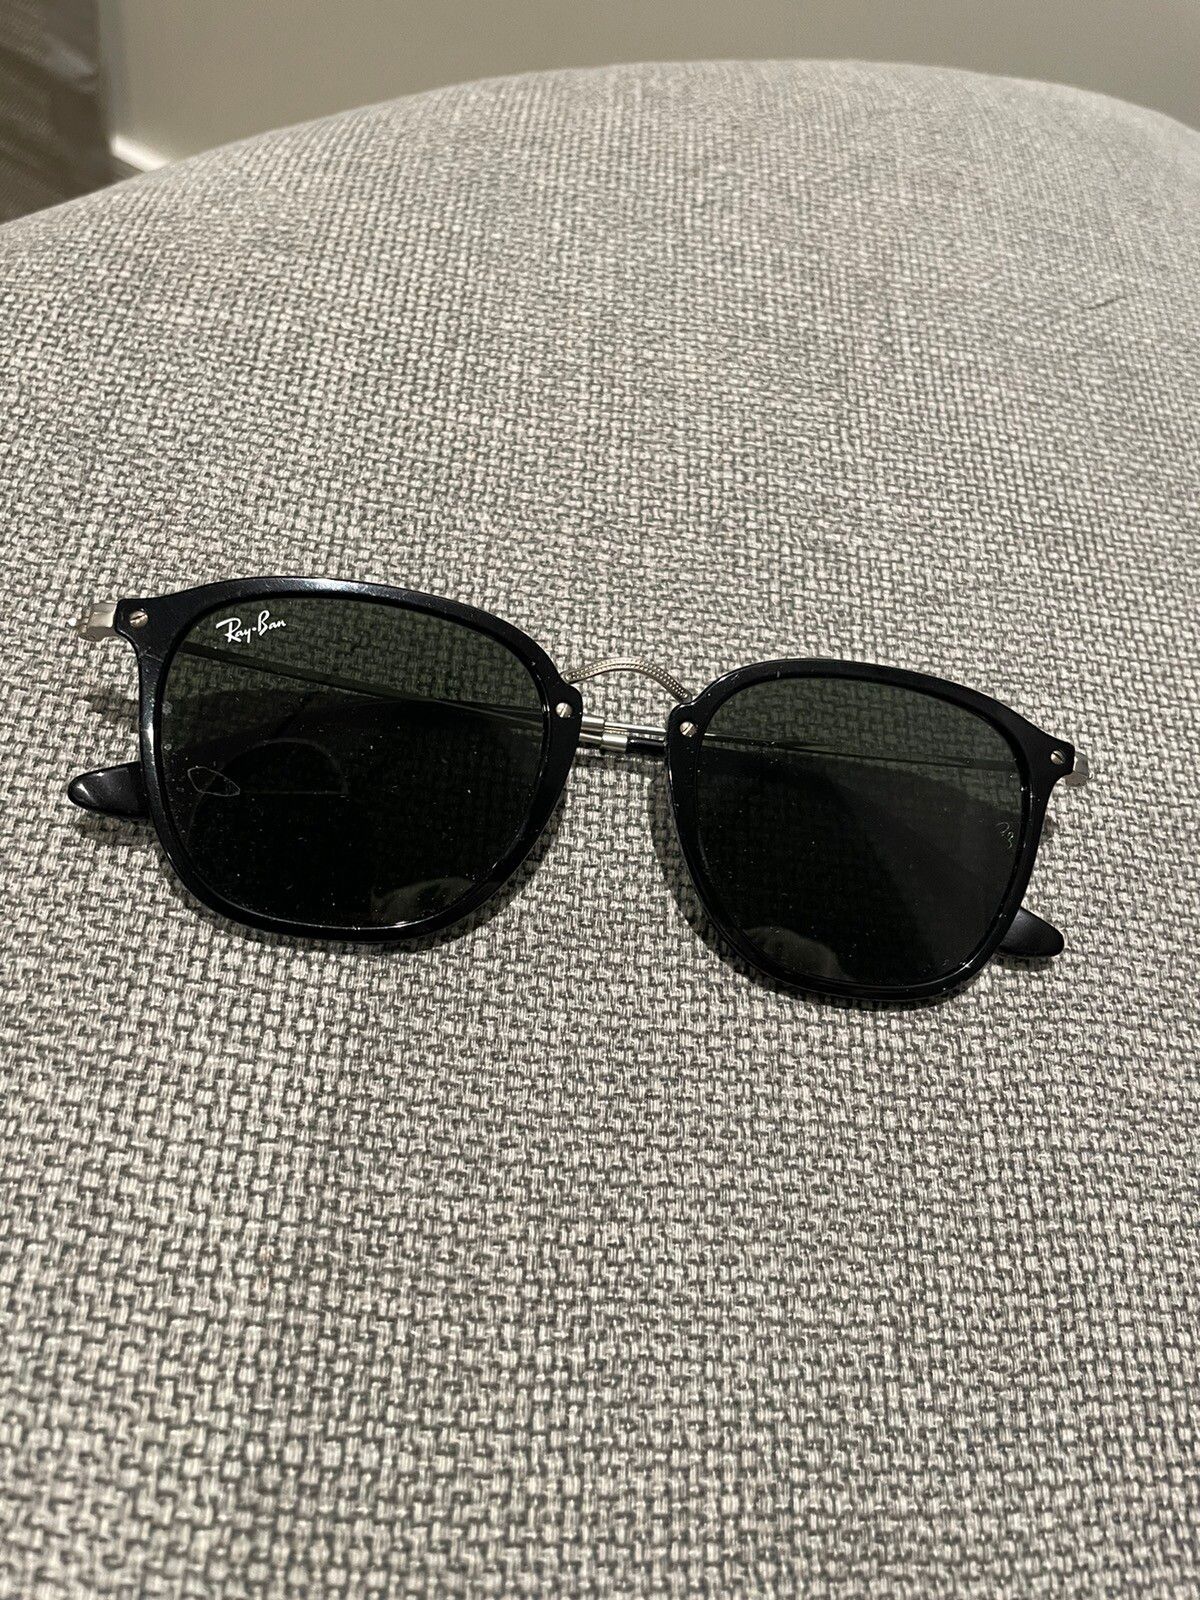 RayBan RAYBAN SUNGLASSES Size ONE SIZE - 1 Preview